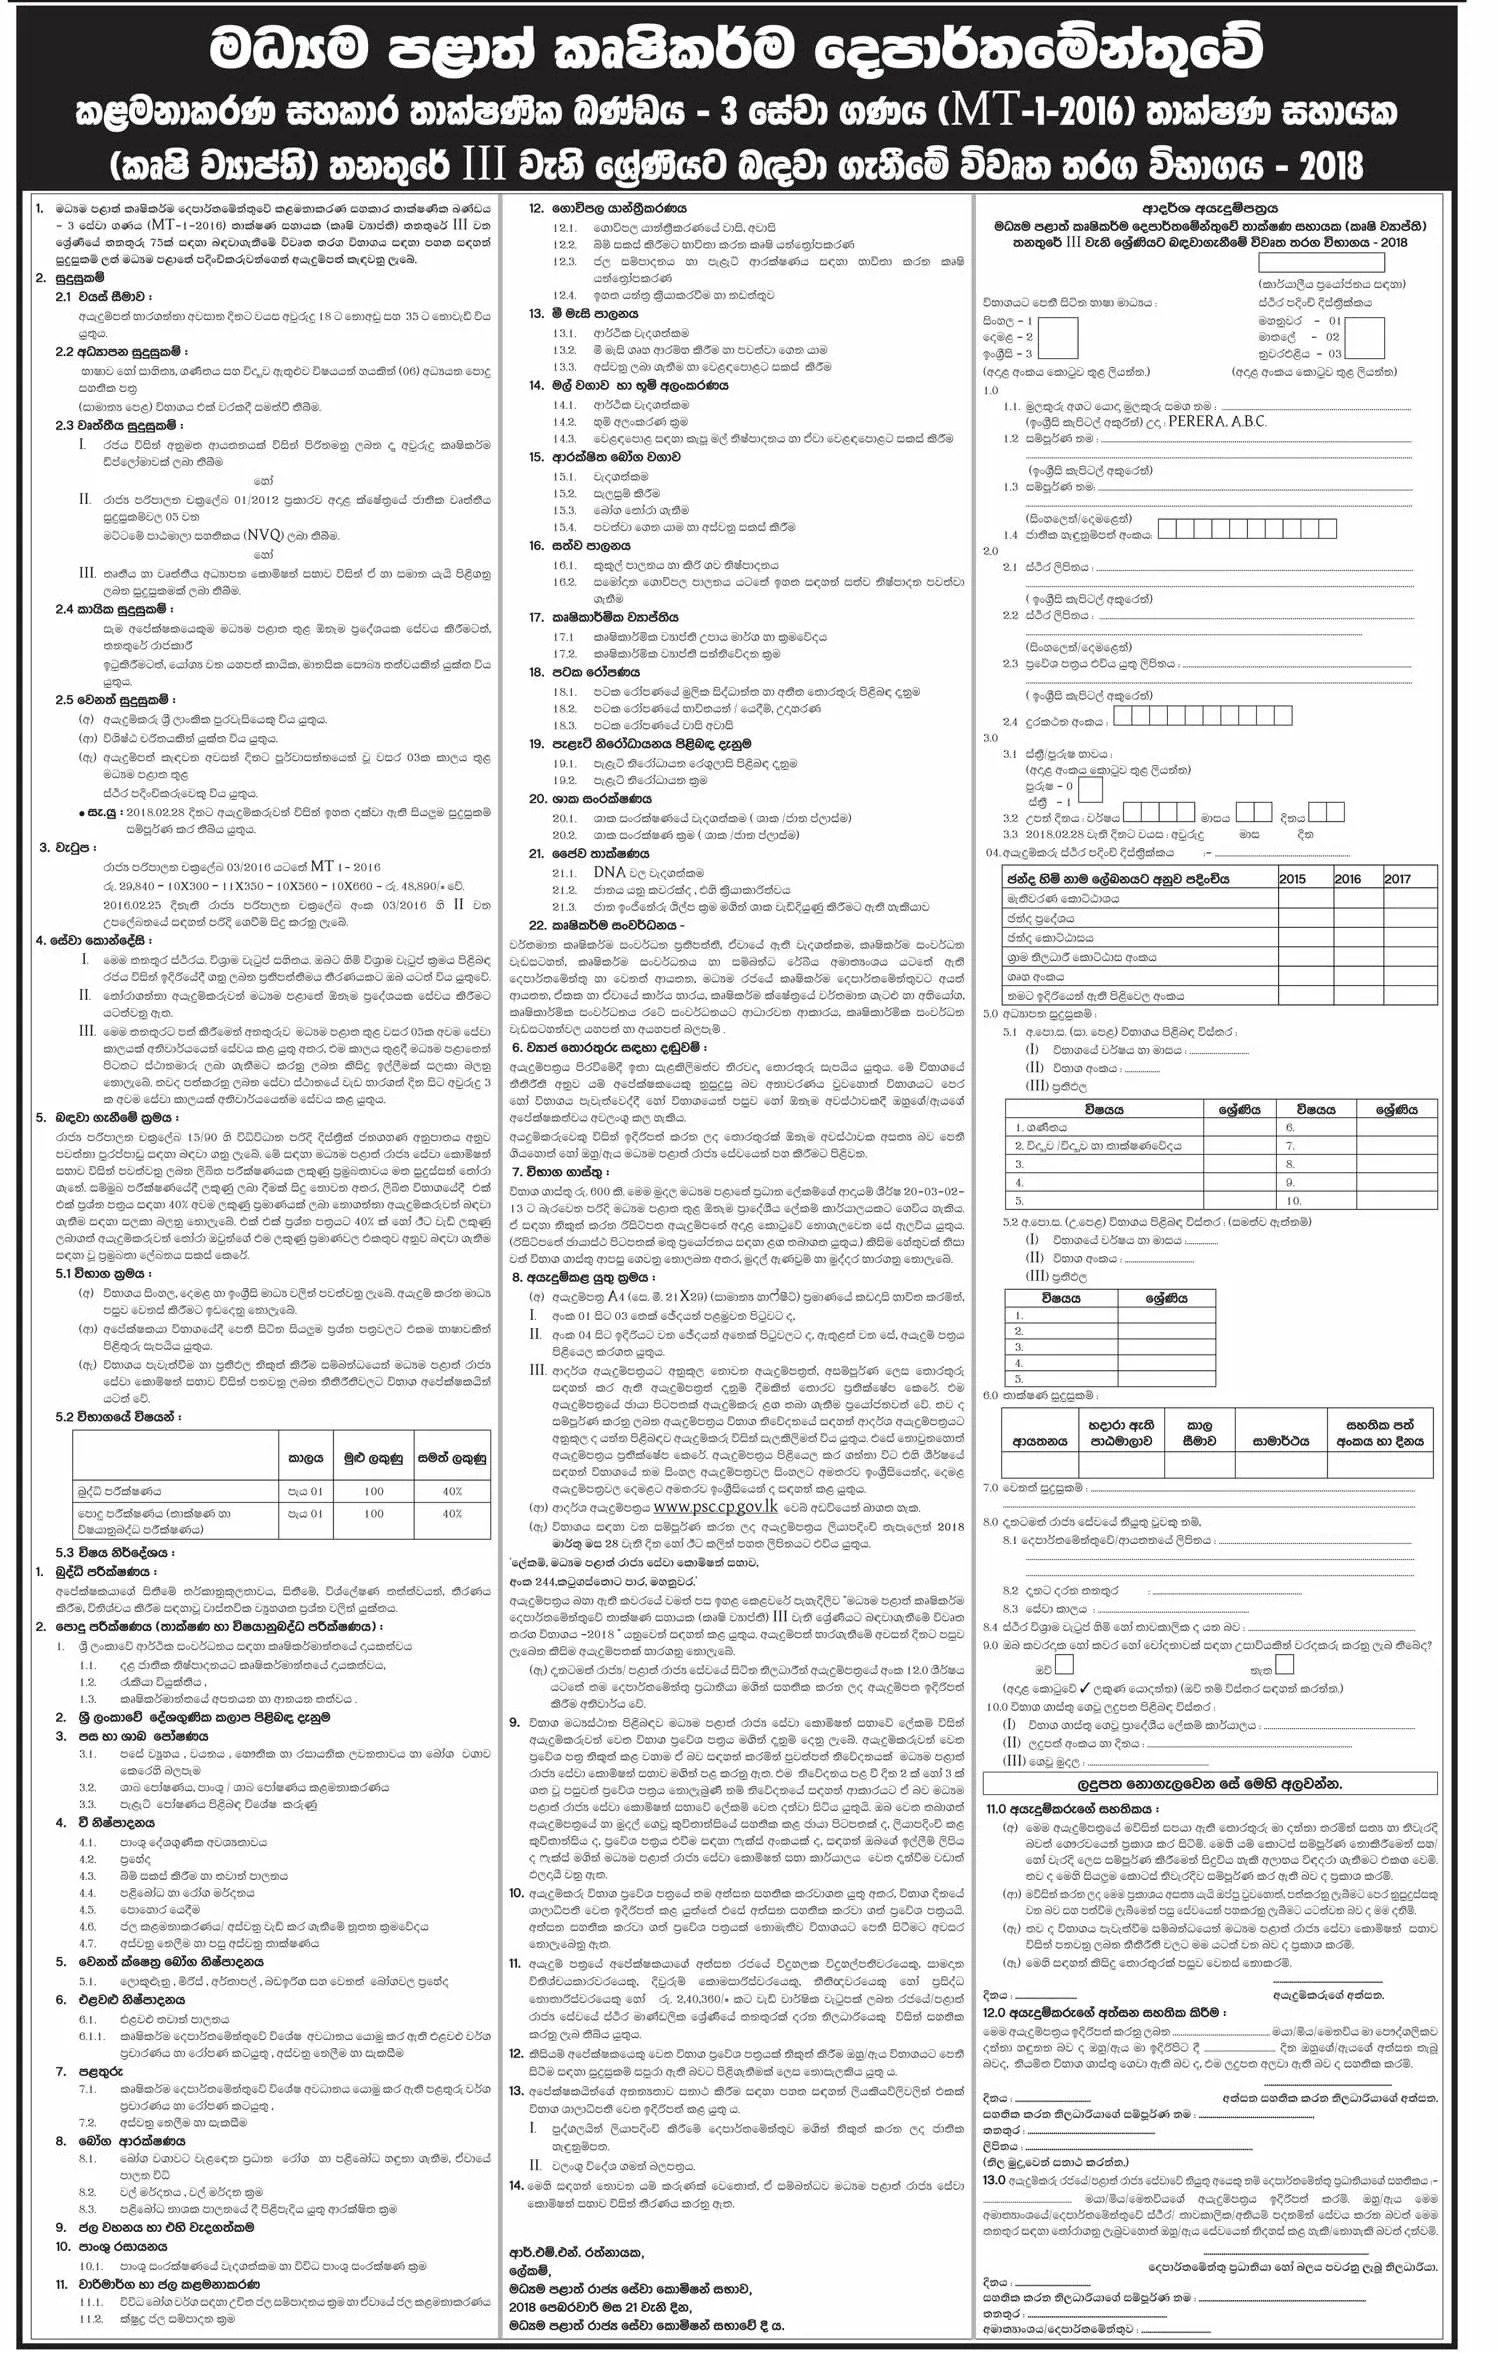 Technical Officer (Agriculture Extension) - Central Provincial Agriculture Department